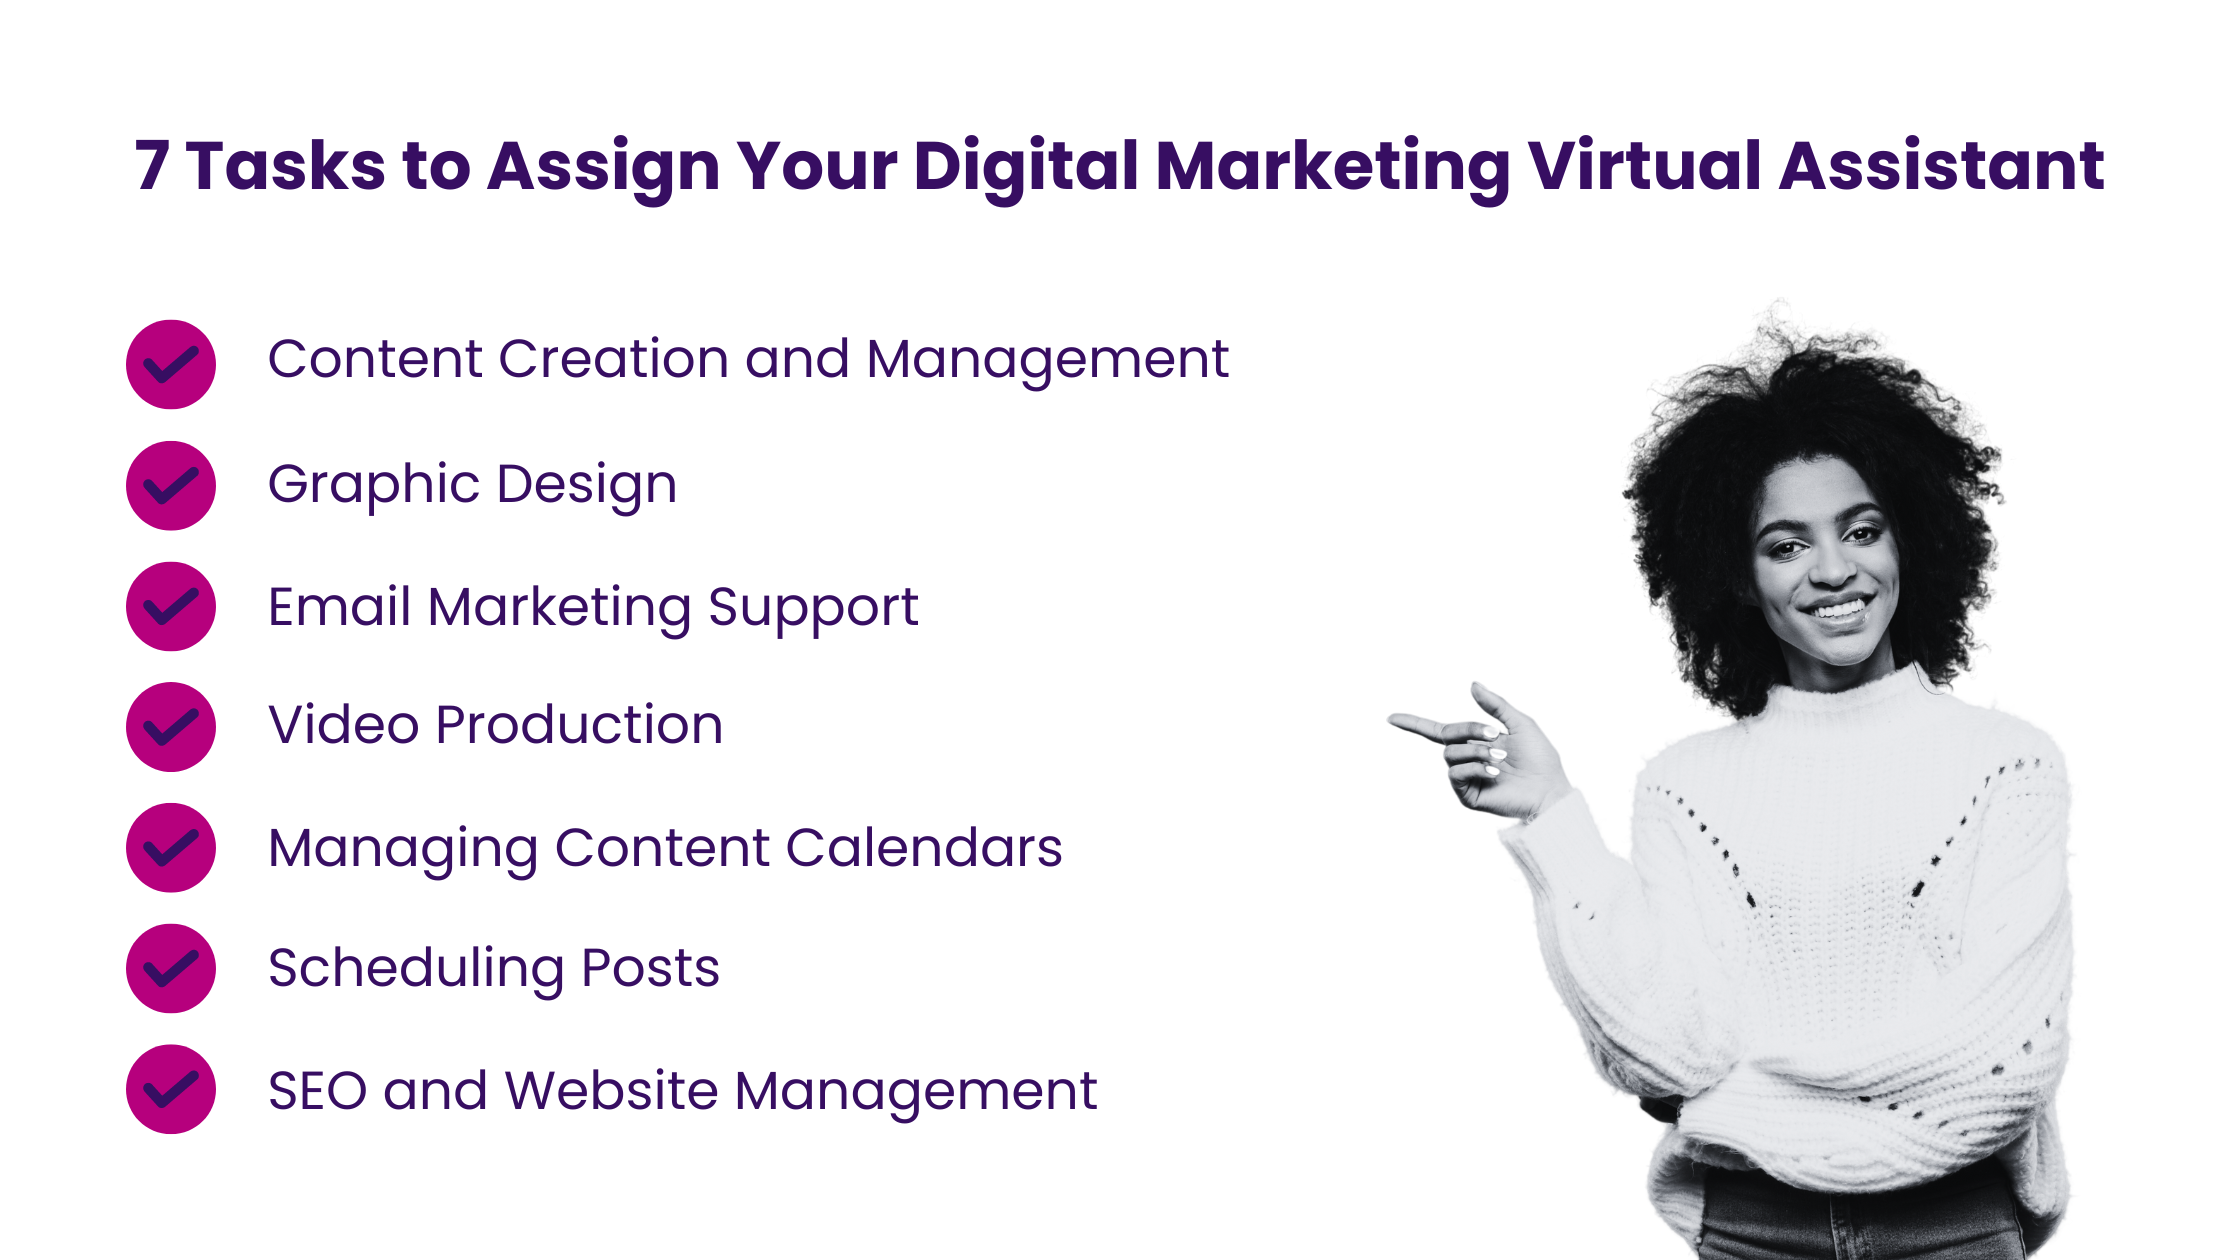 7 Tasks to Assign Your Digital Marketing Virtual Assistant